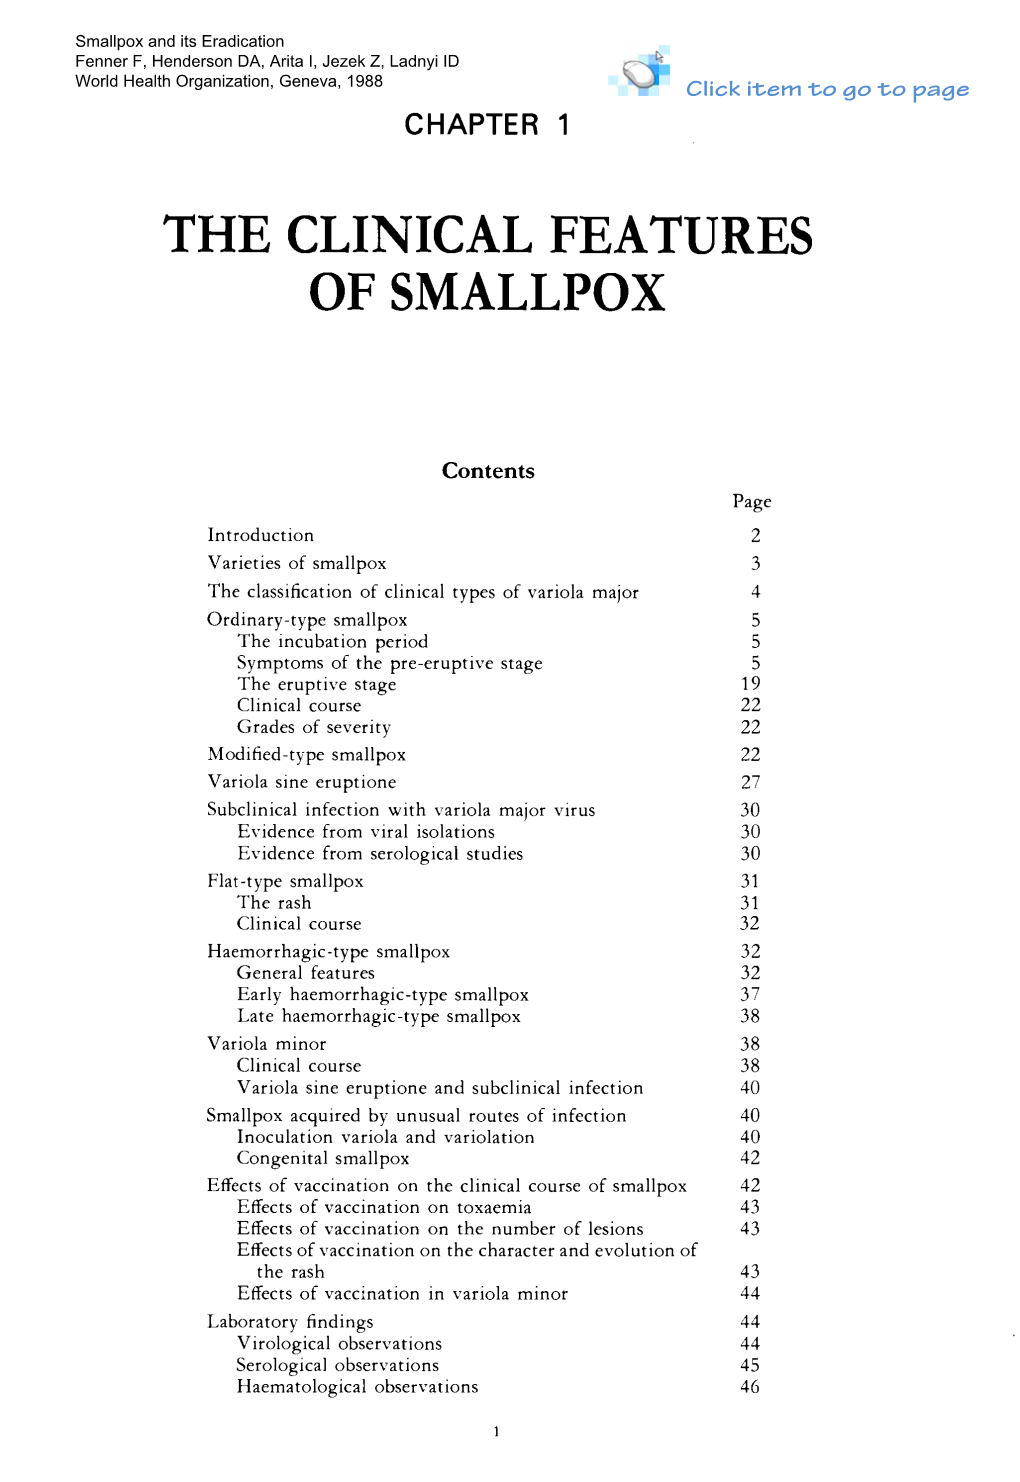 Big Red Book Ch 1. the Clinical Features of Smallpox